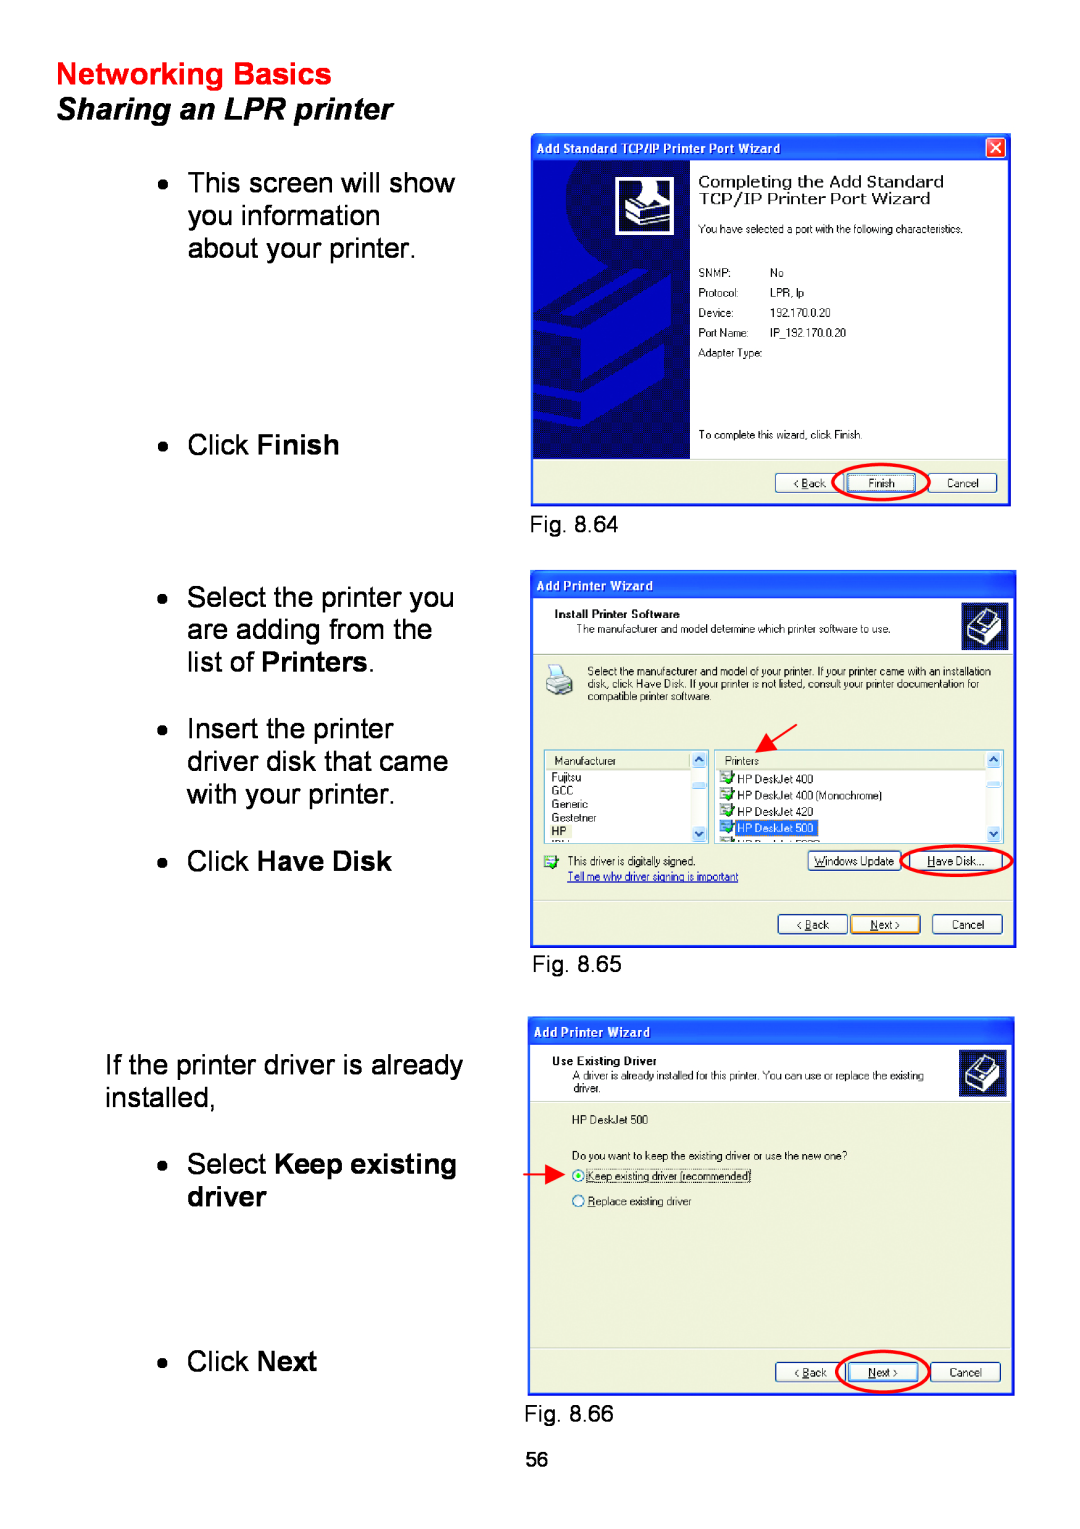 D-Link DWL-650+ Click Have Disk, Networking Basics, Sharing an LPR printer, If the printer driver is already installed 